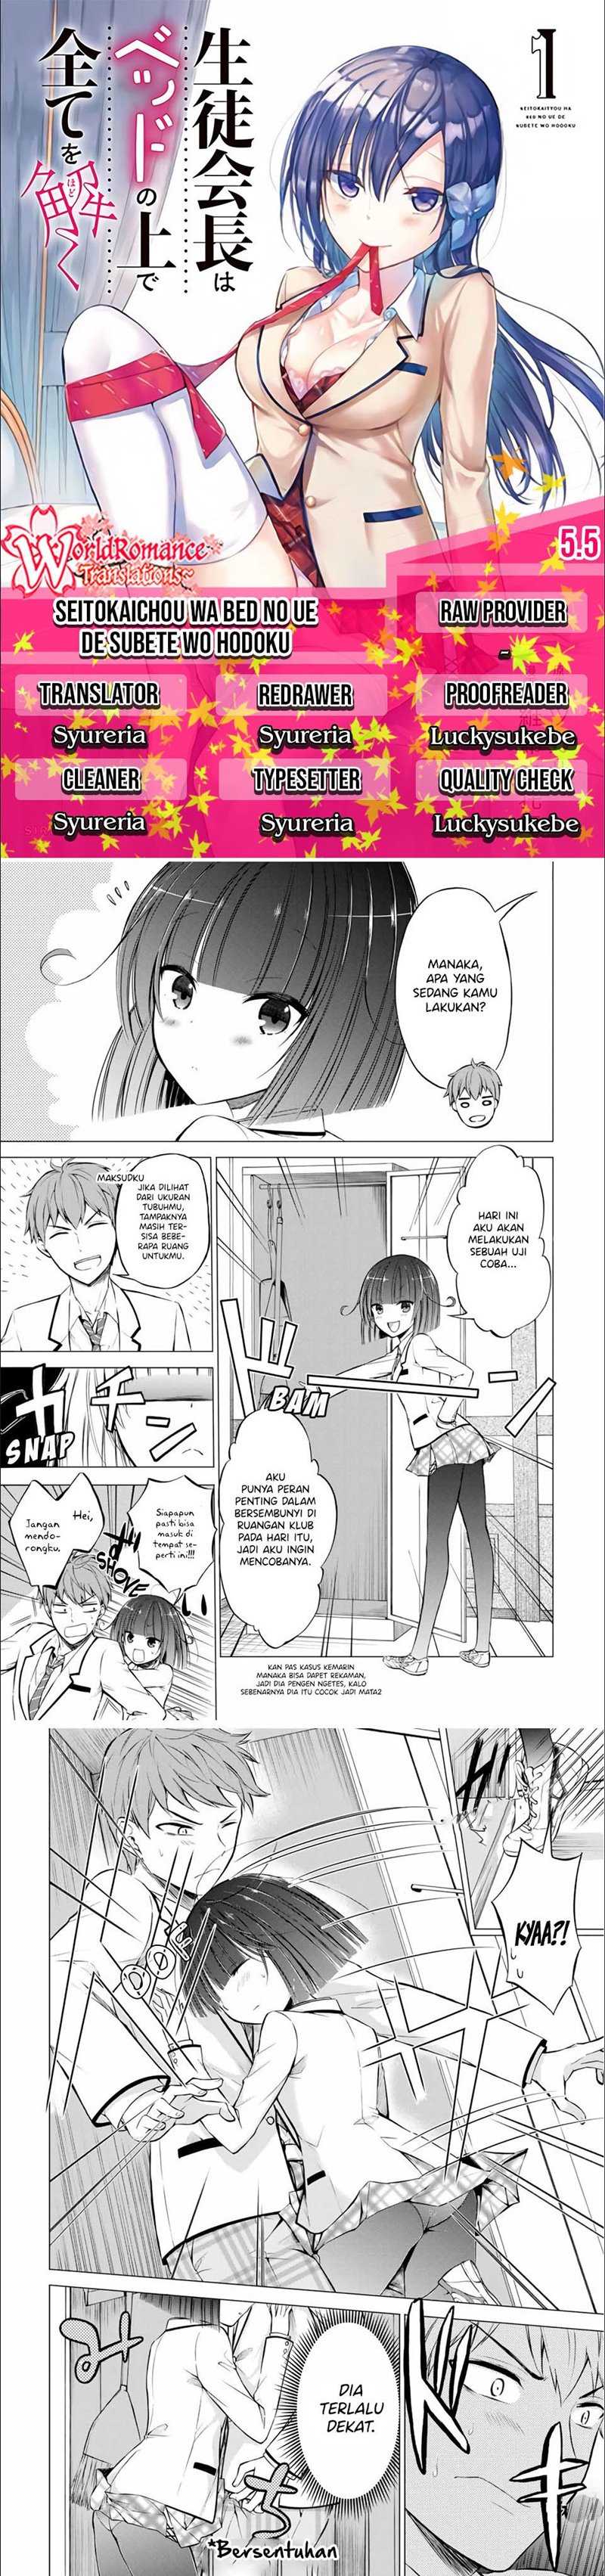 The Student Council President Solves Everything on the Bed Chapter 5.5